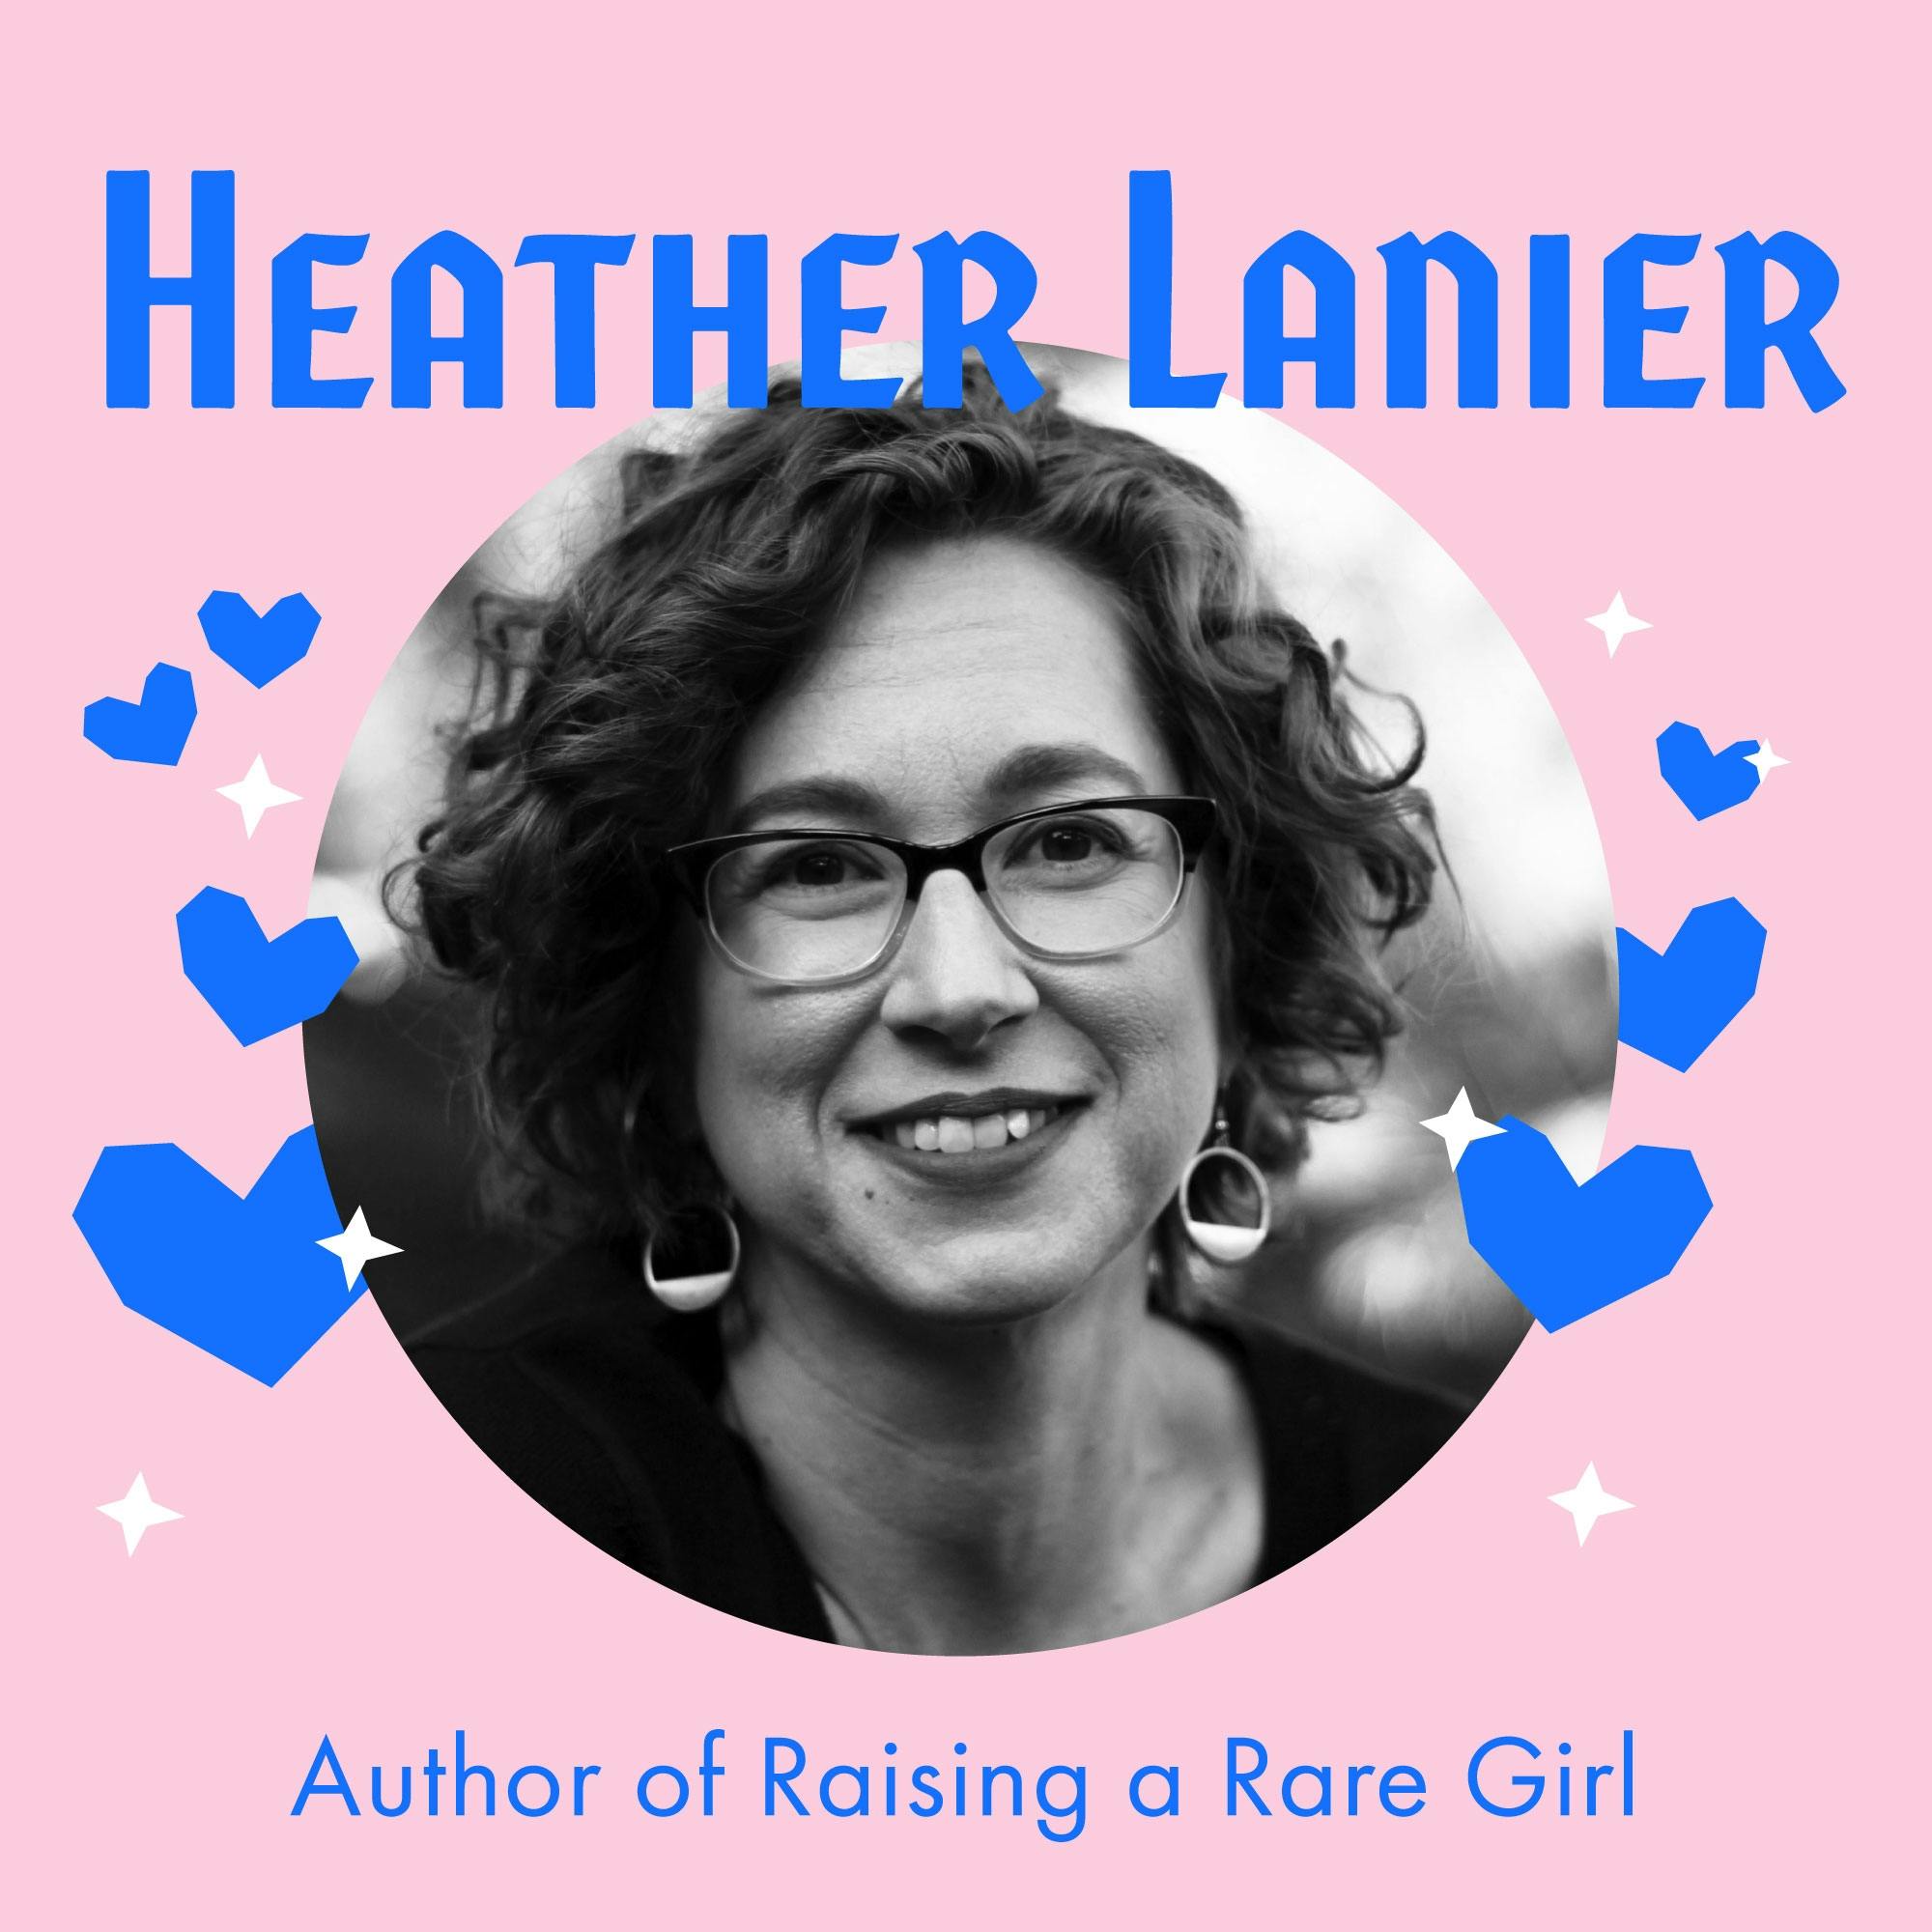 Rare Book Club with Co-Host Patti Hall – Featuring Heather Lanier and Her Book, Raising a Rare Girl